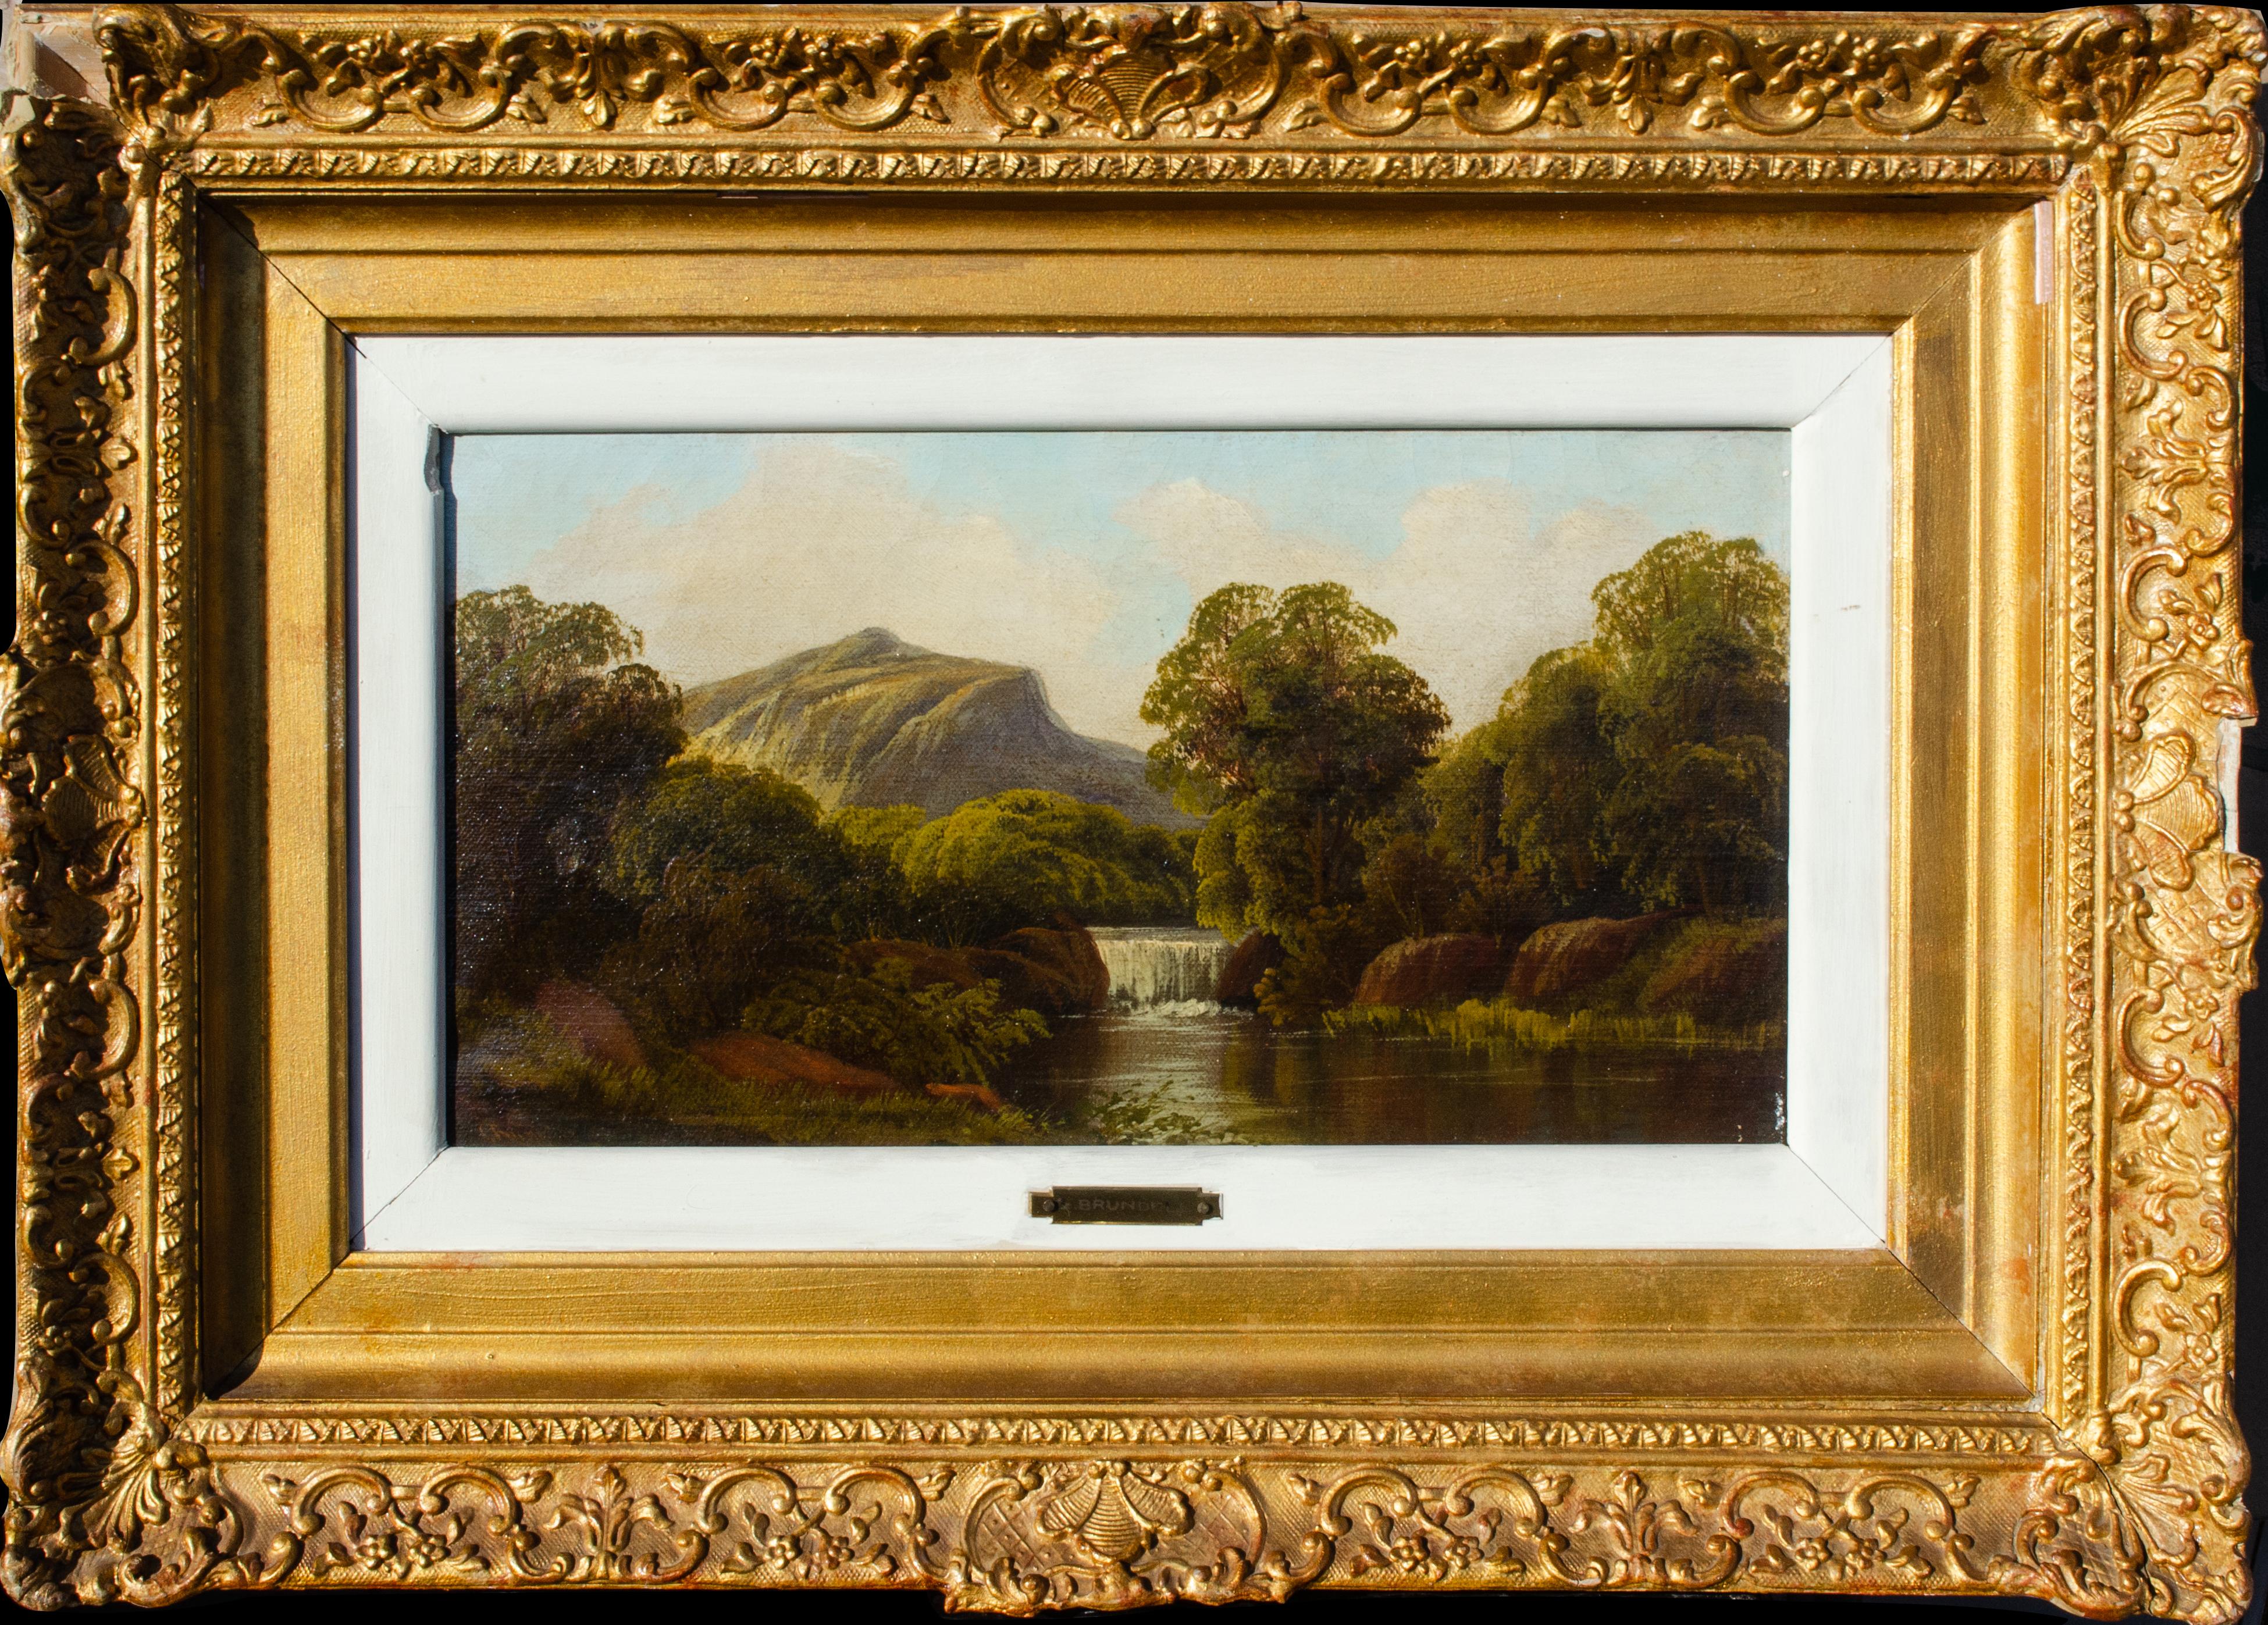 Unknown Figurative Painting - Hudson River School Style Painting, Signed Brundell